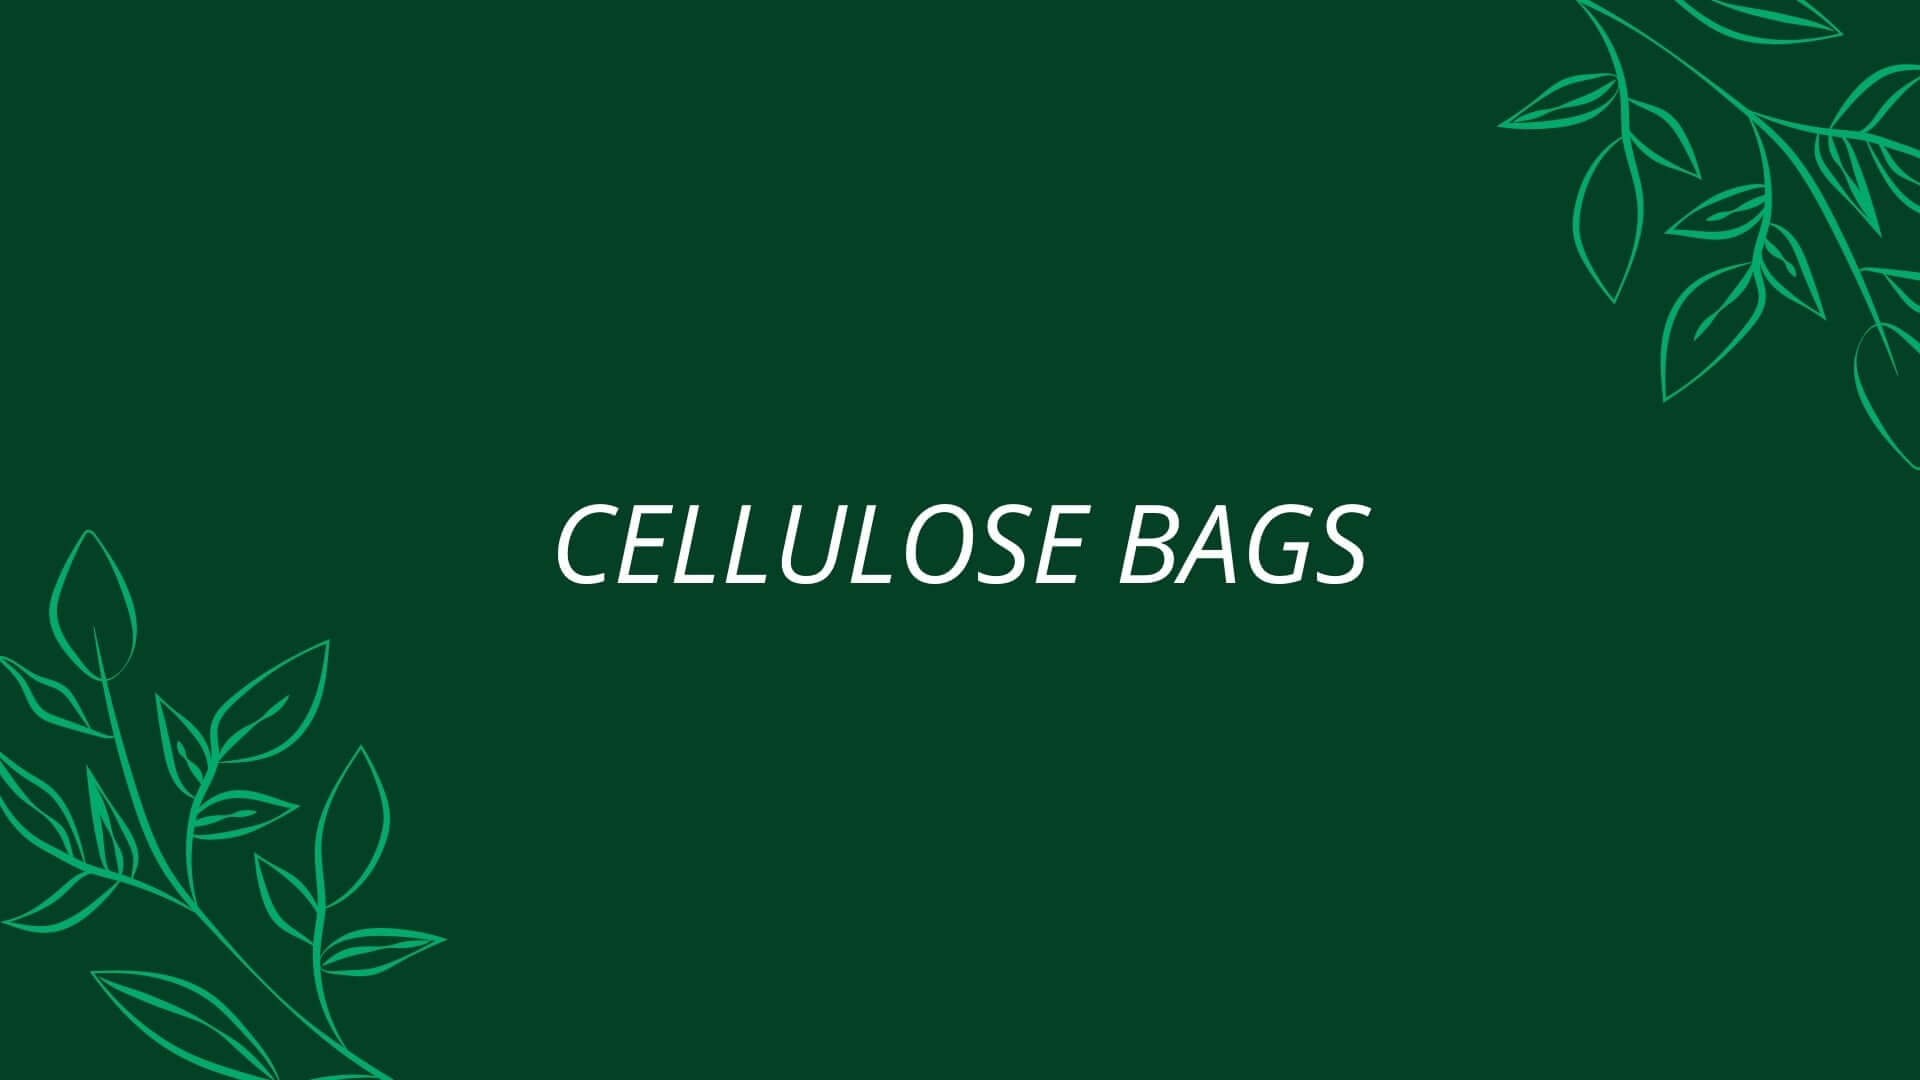 Cellulose Bags: The Eco-Friendly Solution to the Shopping Bag Conundrum